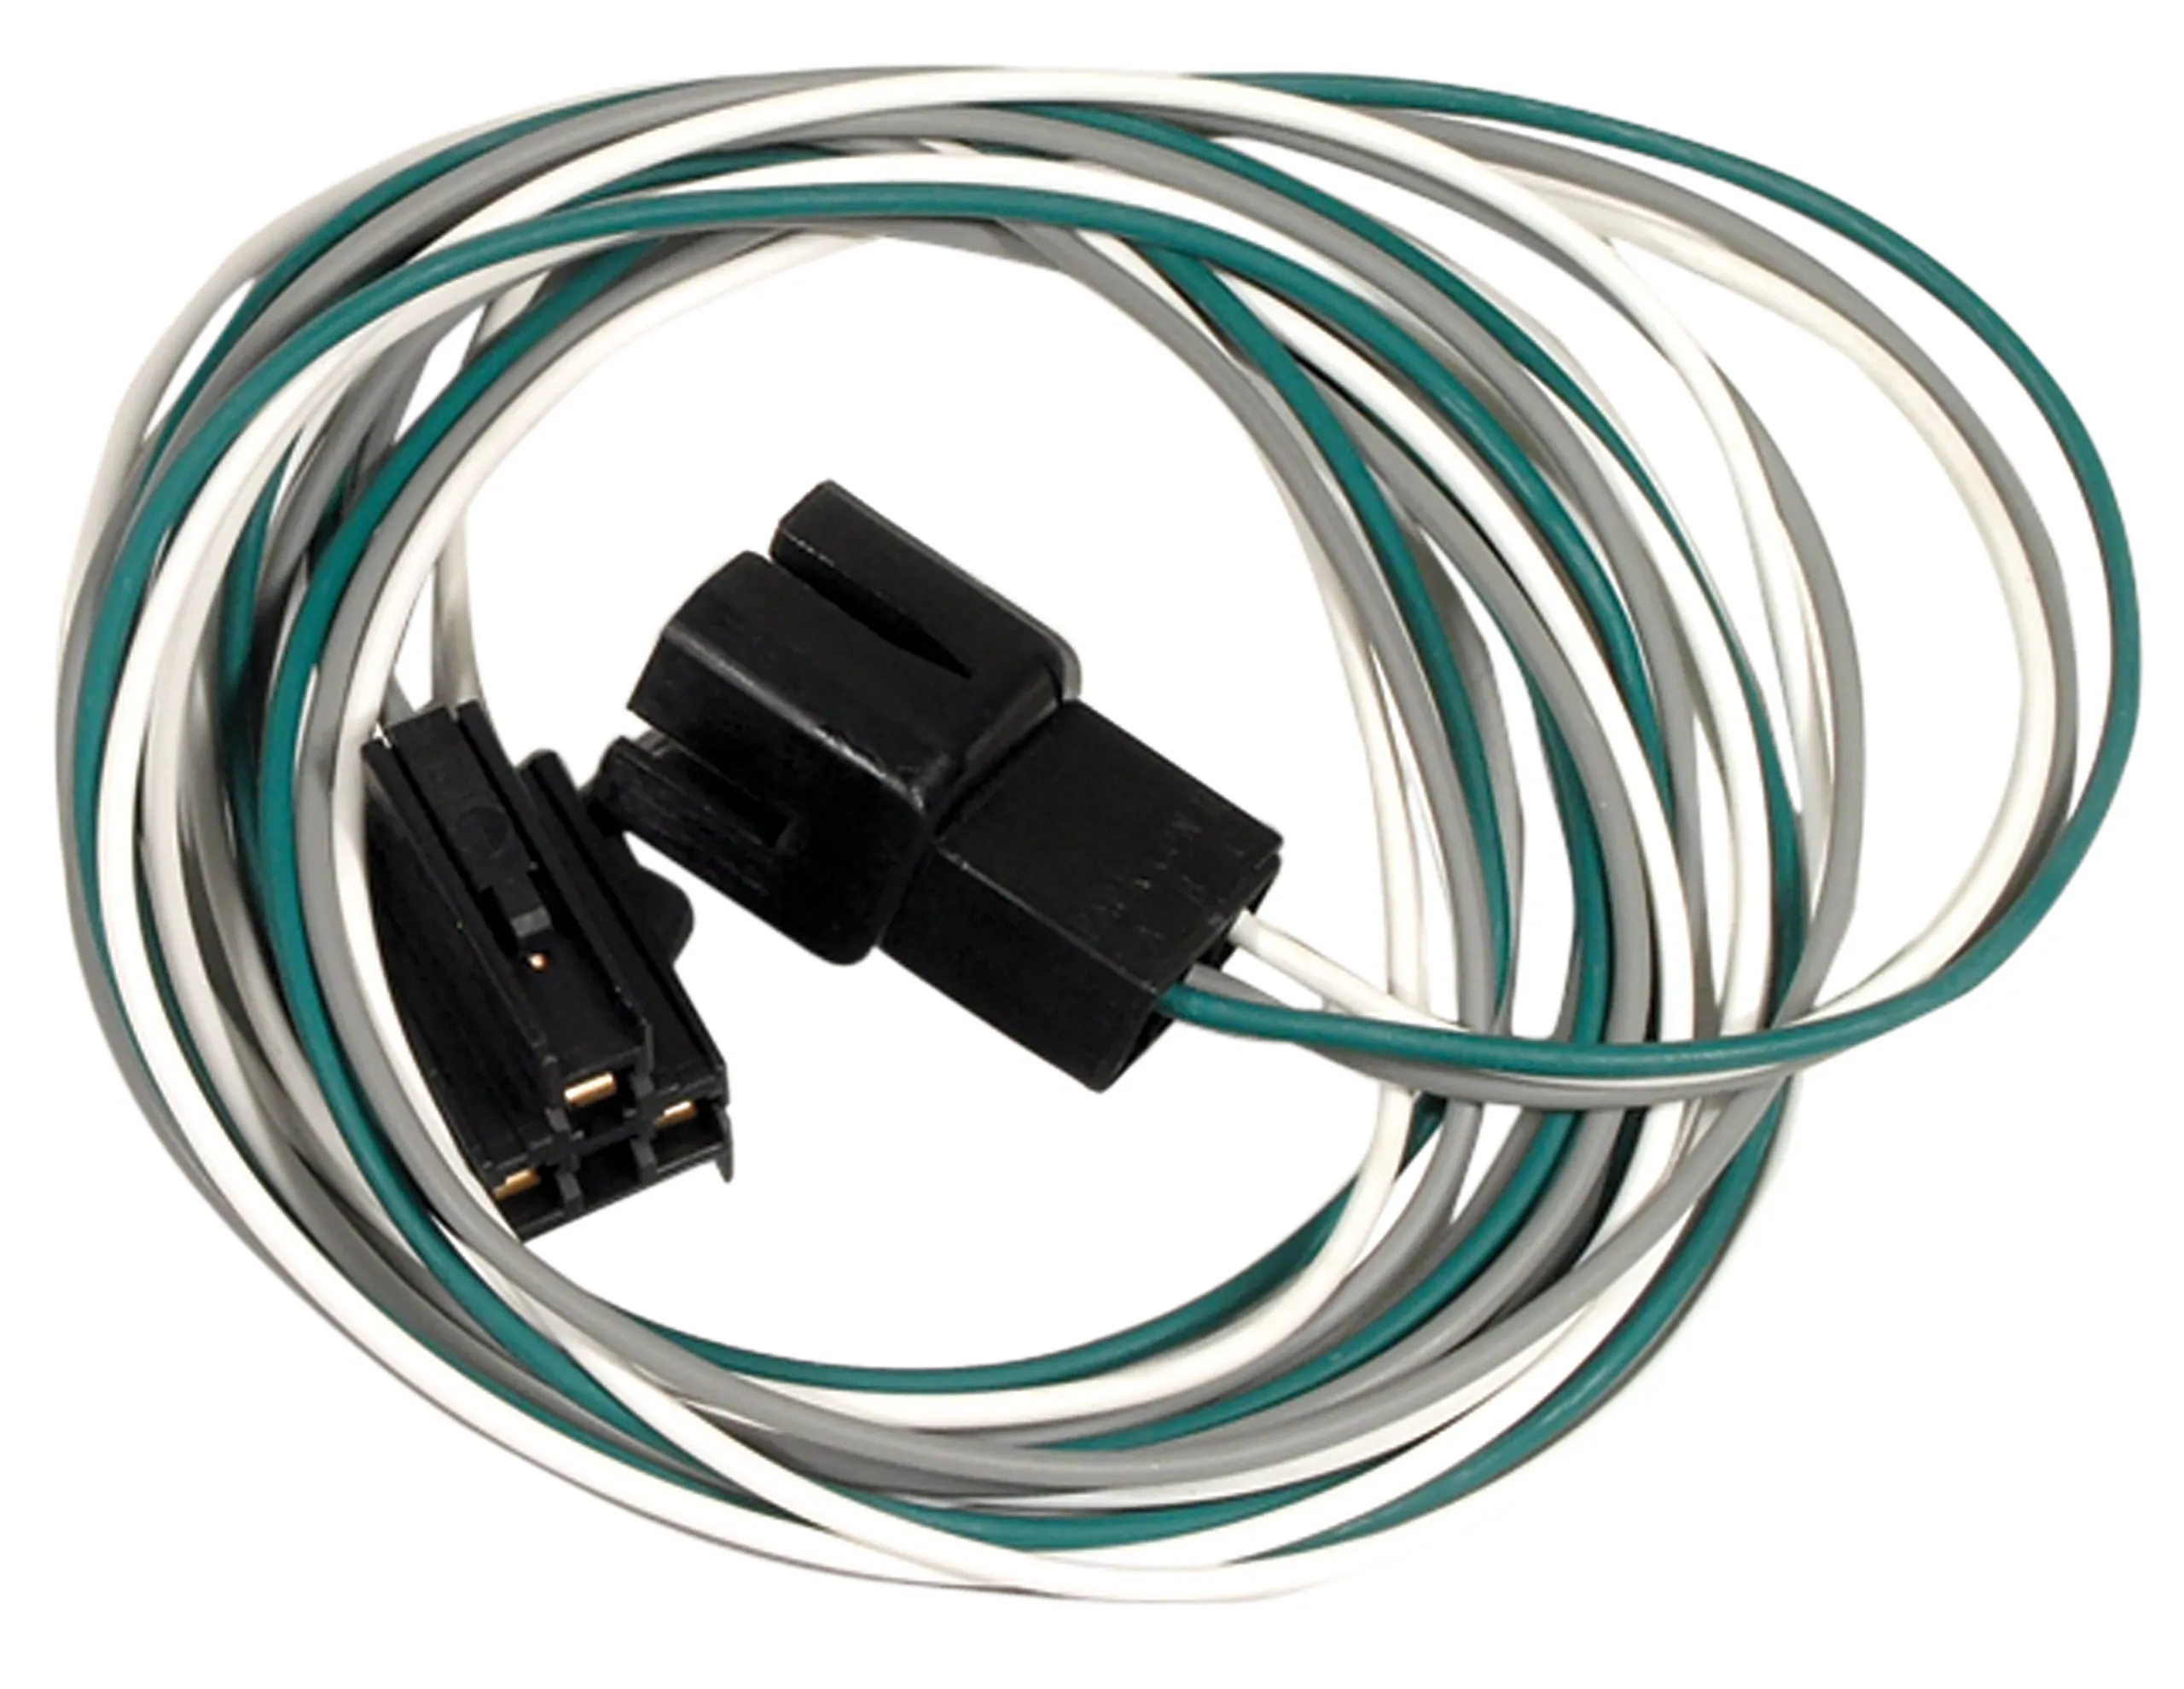 C3 1980-1982 Chevrolet Corvette Harness. Power Antenna Relay To Antenna - Lectric Limited, Inc.